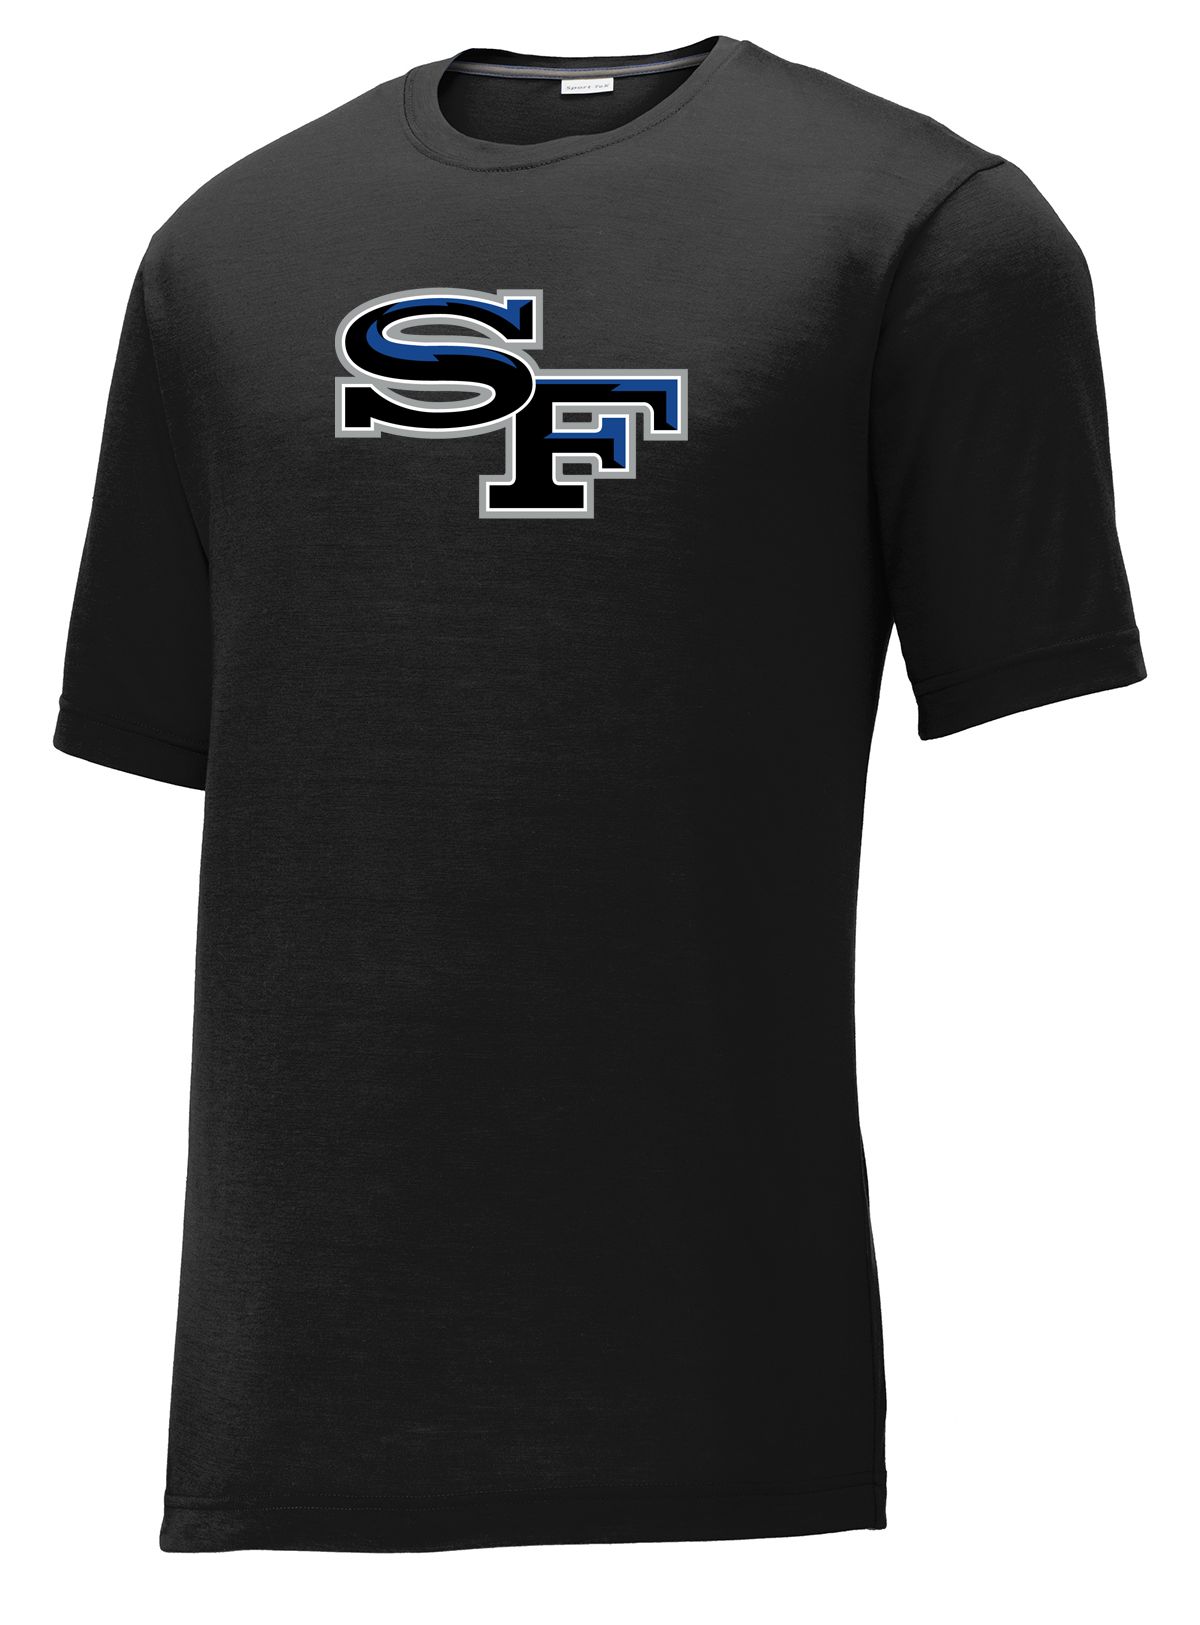 South Forsyth Girls Lacrosse CottonTouch Performance T-Shirt